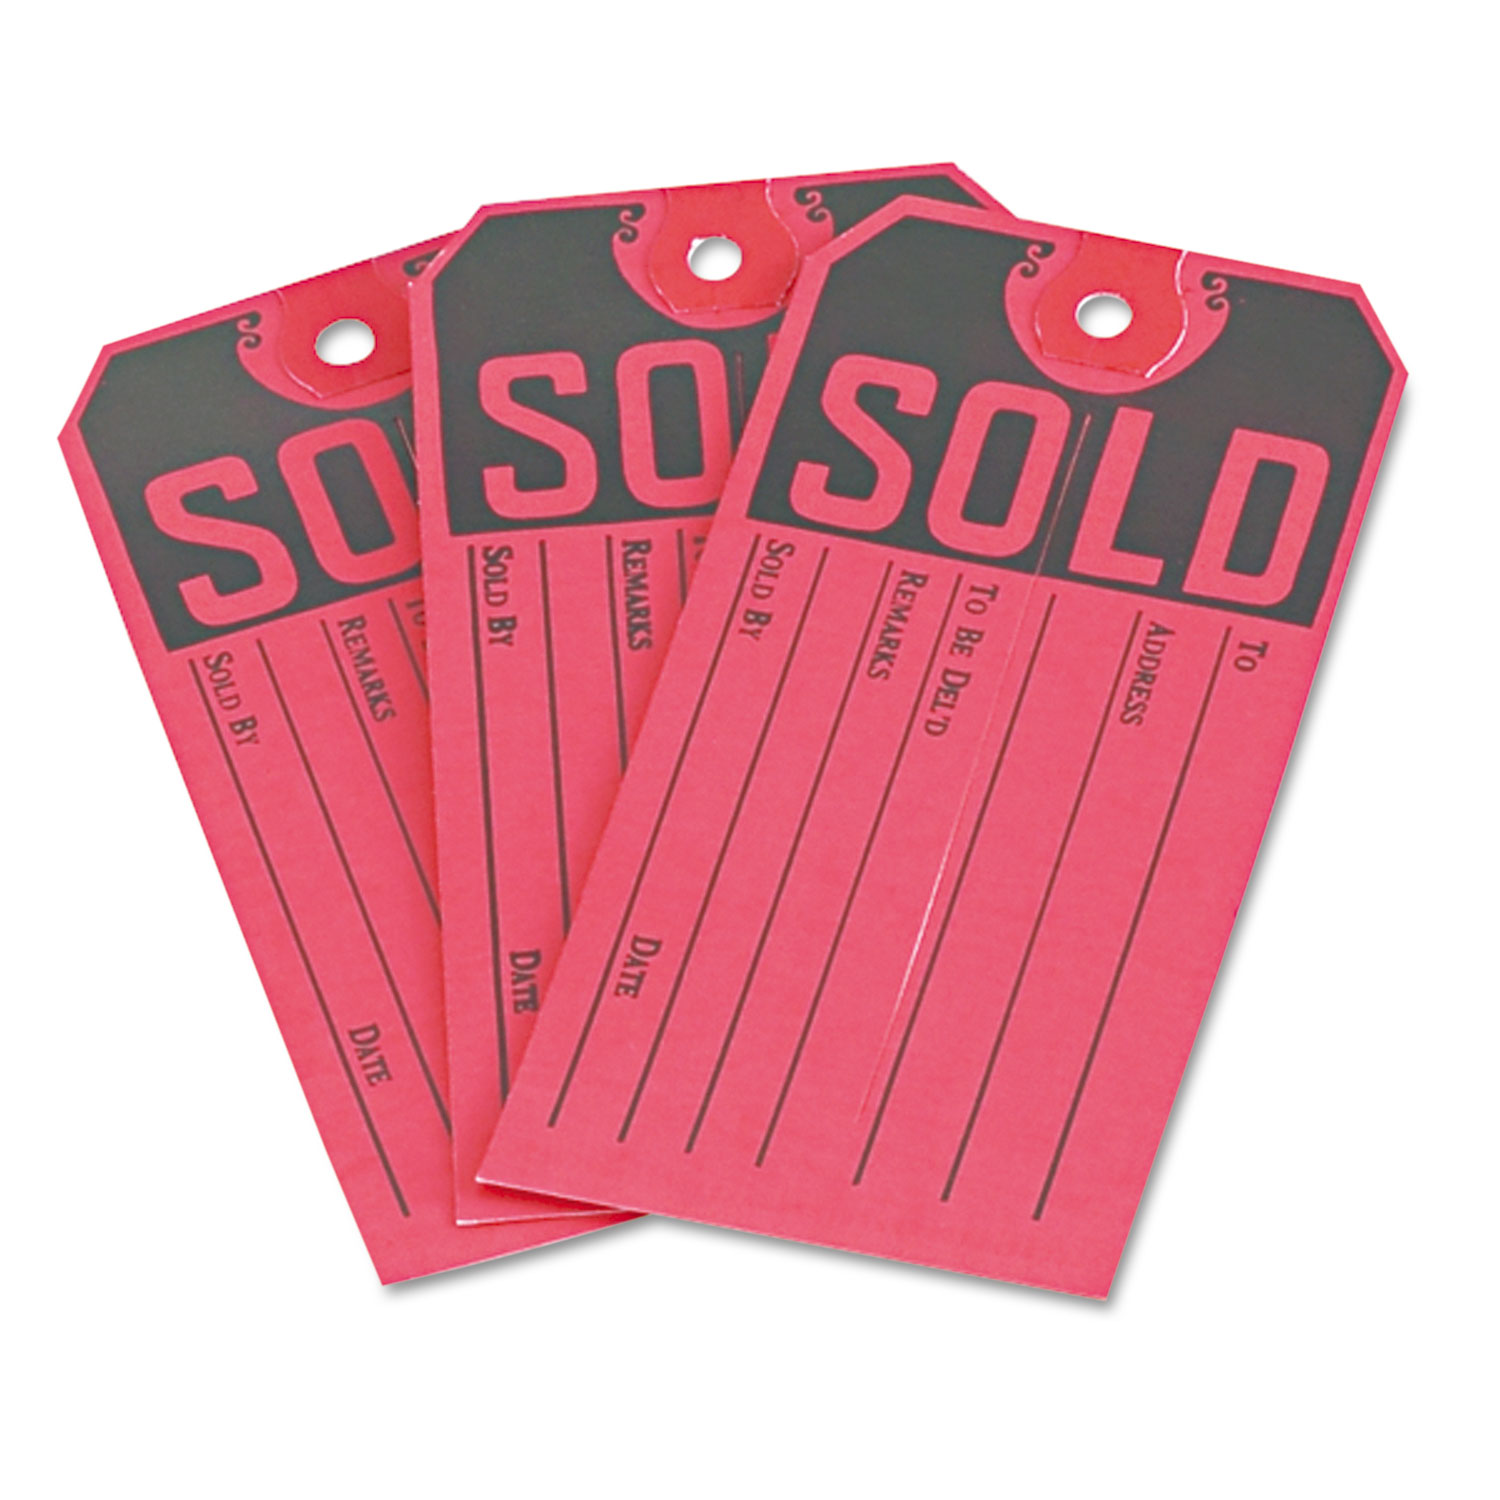 CLEARANCE SALE Tags w Slit, 5 x 7, Cardstock - Pack of 250 Tags 